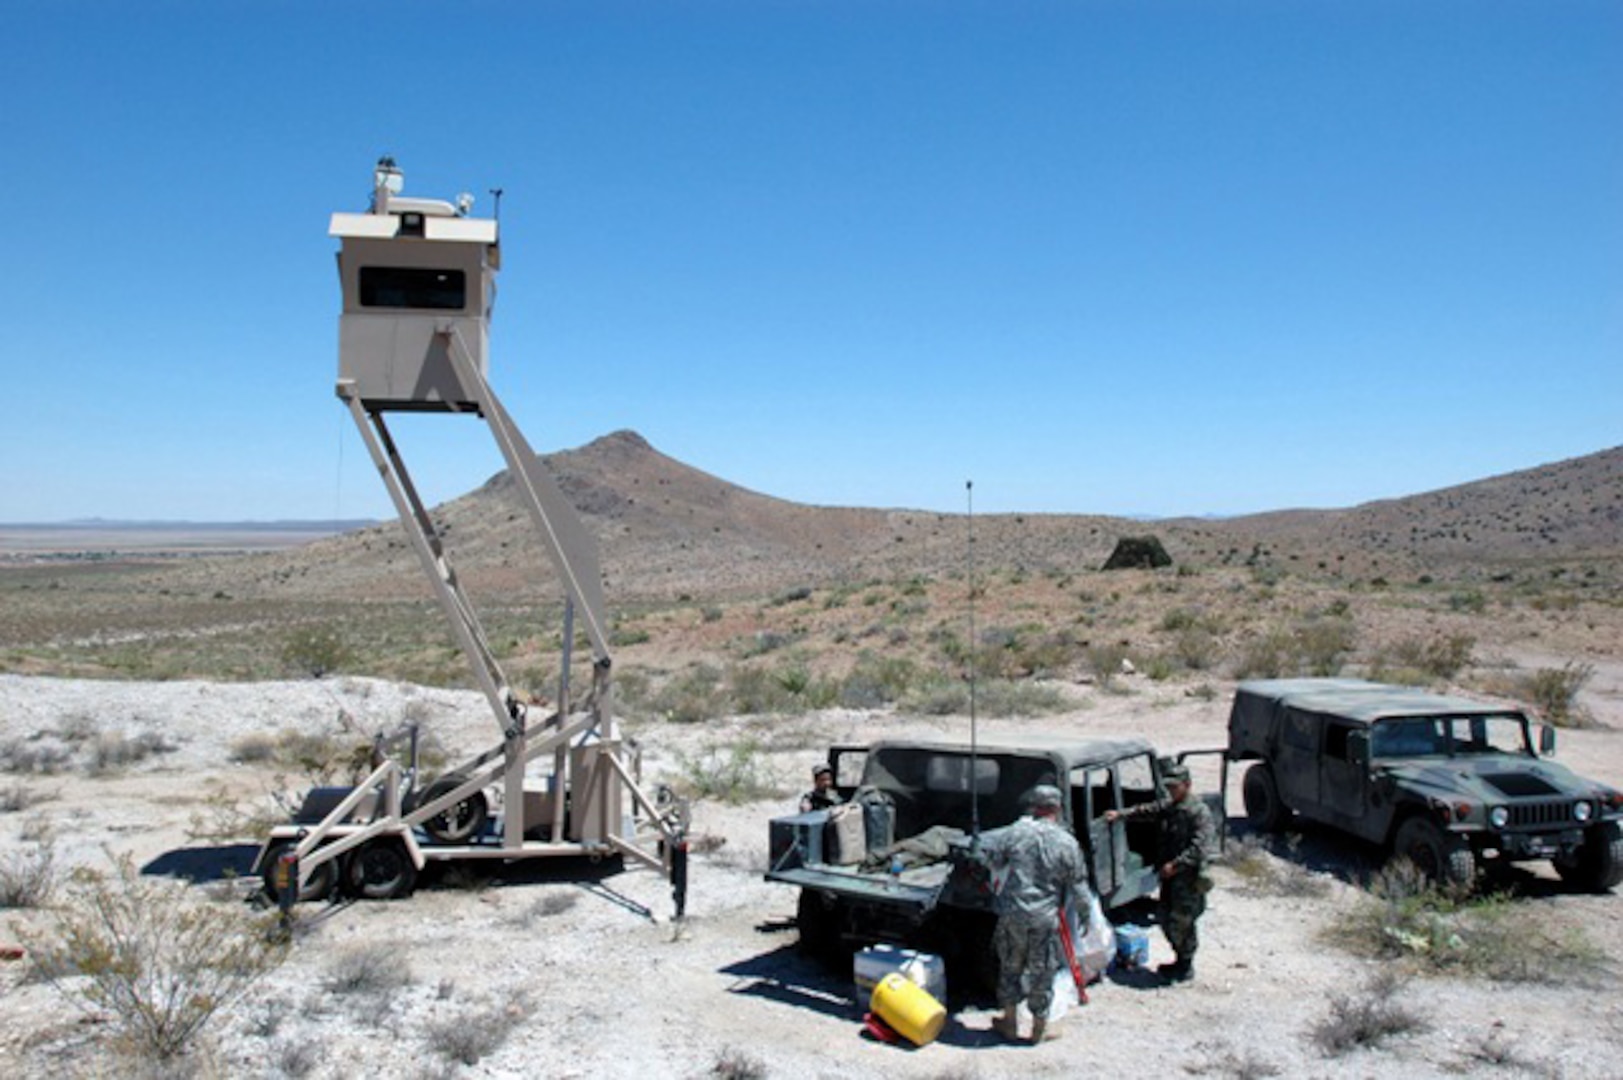 An entry identification team consisting of U.S. Army Soldiers from the National Guard man a post on Johnson Mountain in New Mexico June 17, 2006. The team gathers intelligence about illegal immigrants attempting to enter the U.S. from Mexico and relays it to Border Patrol agents.